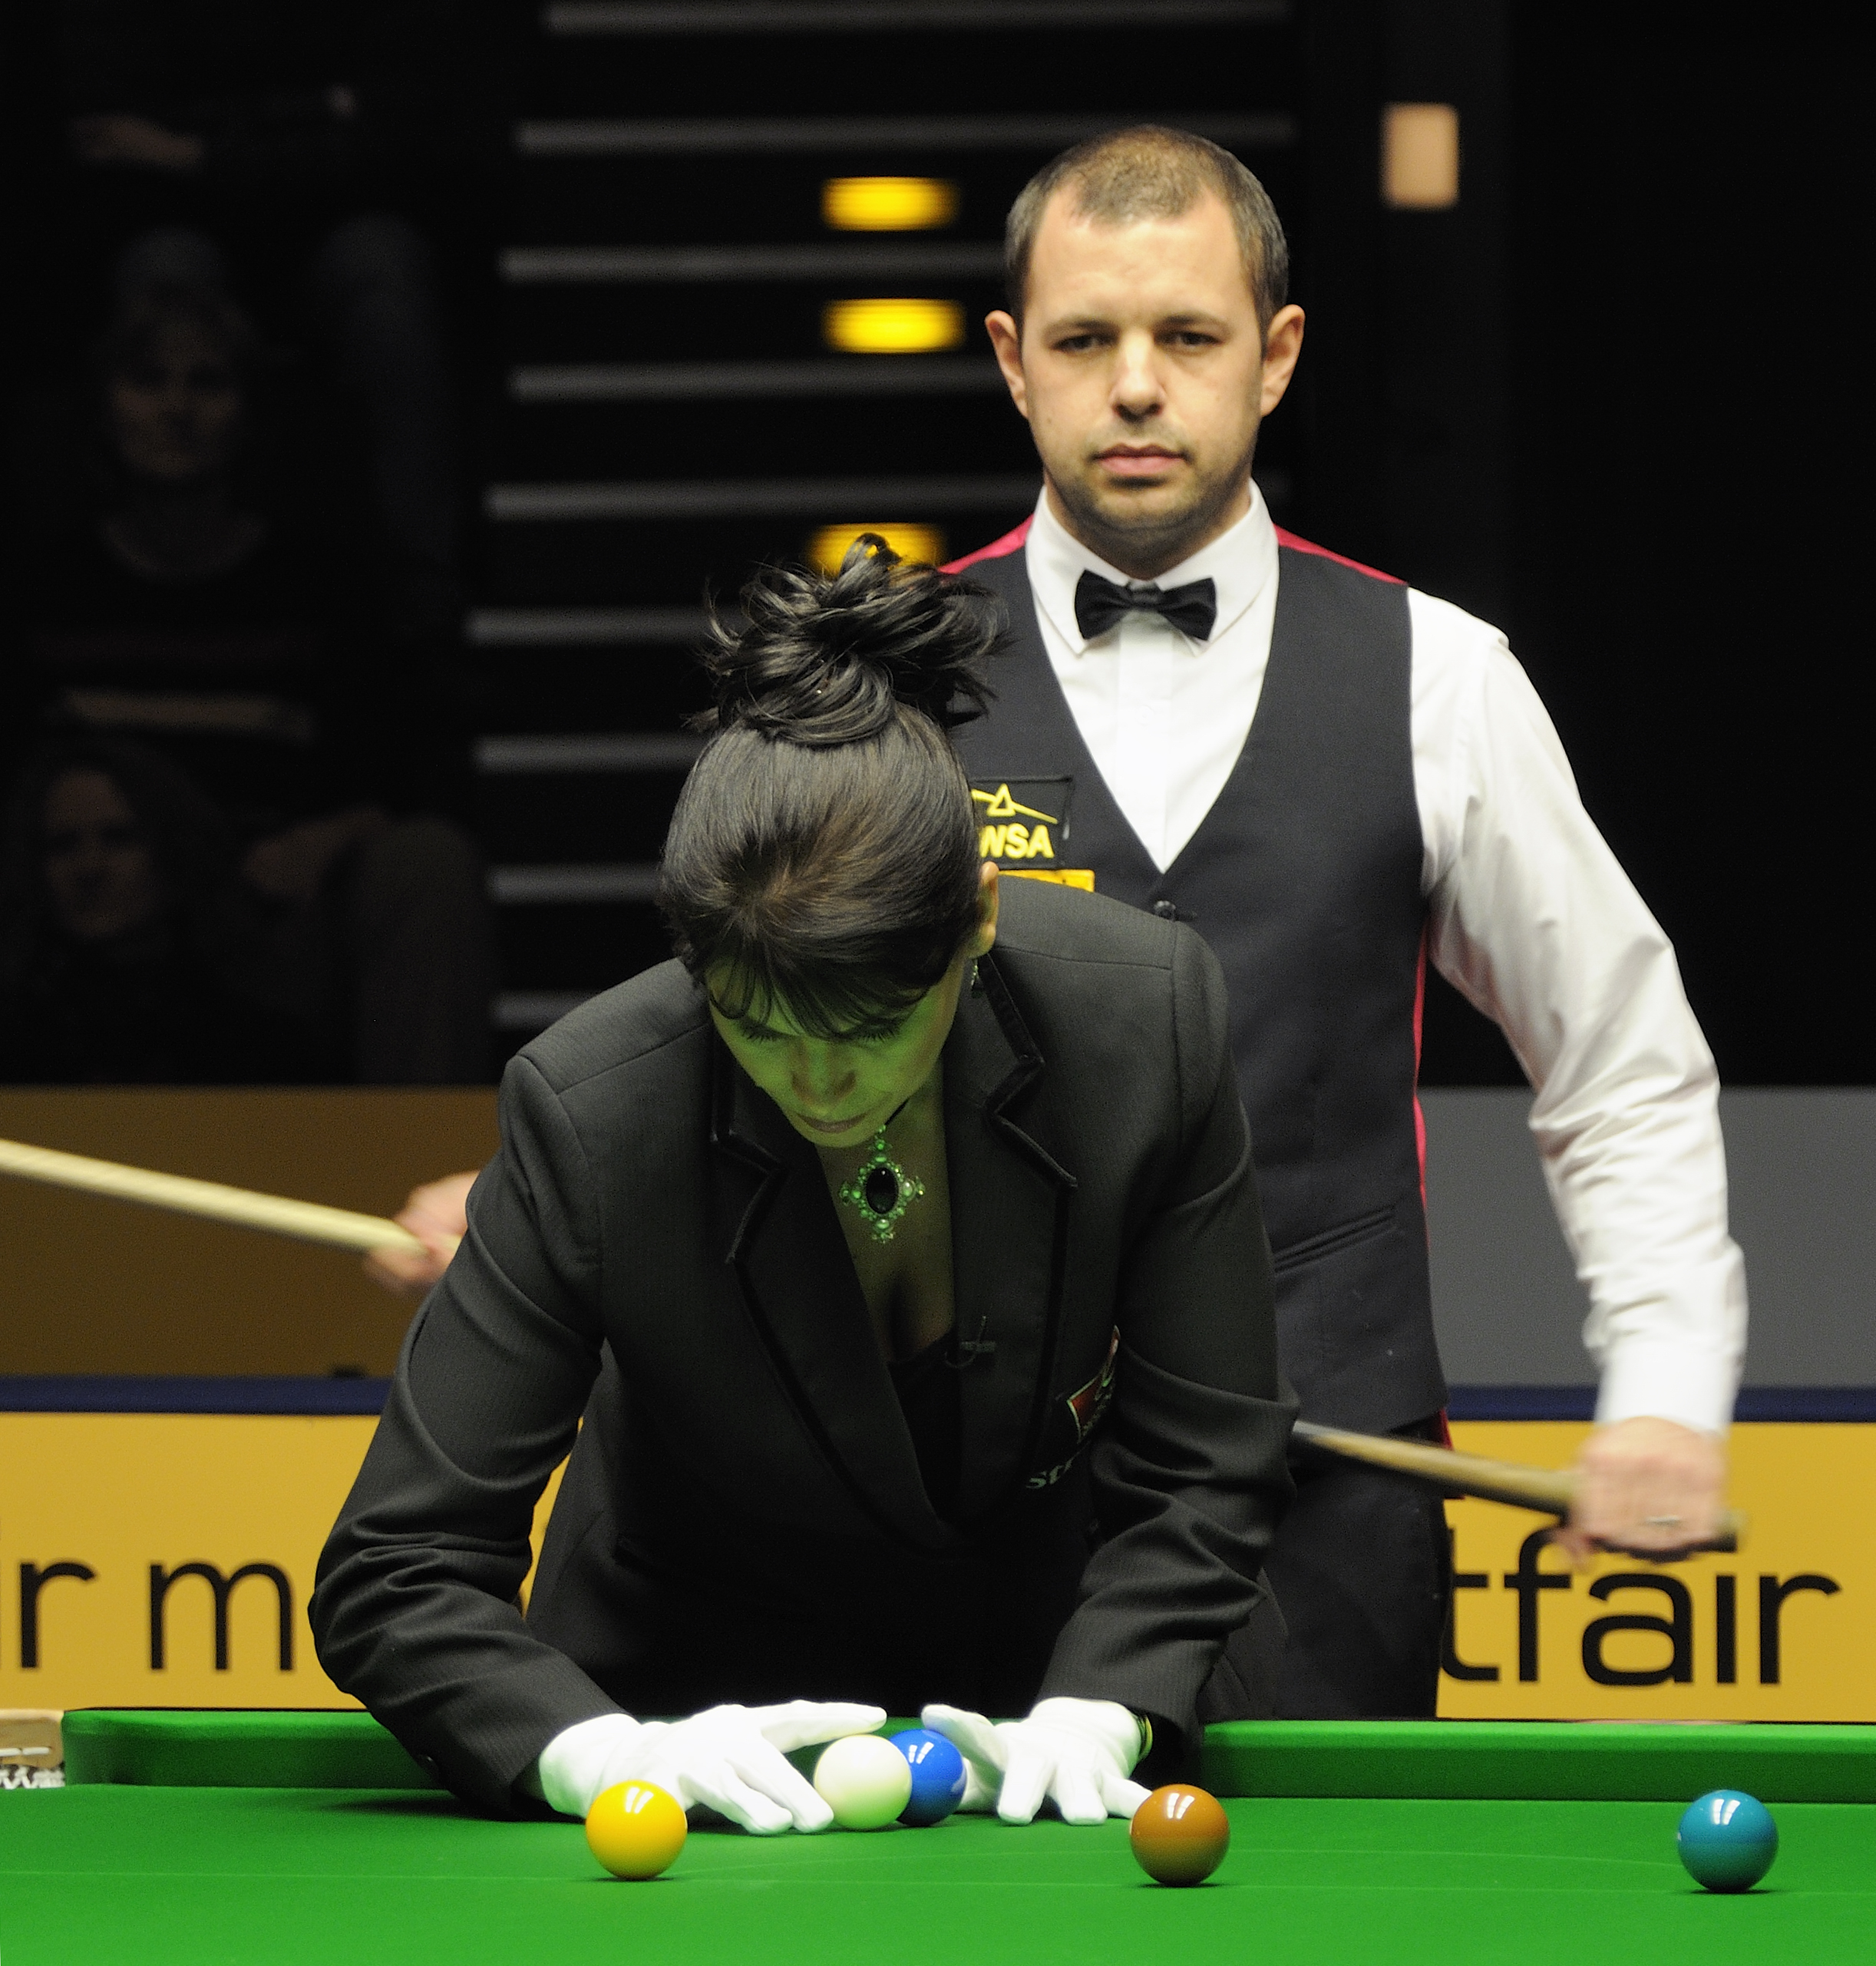 Barry Hawkins and Michaela Tabb at Snooker German Masters (DerHexer) 2013-02-02 6